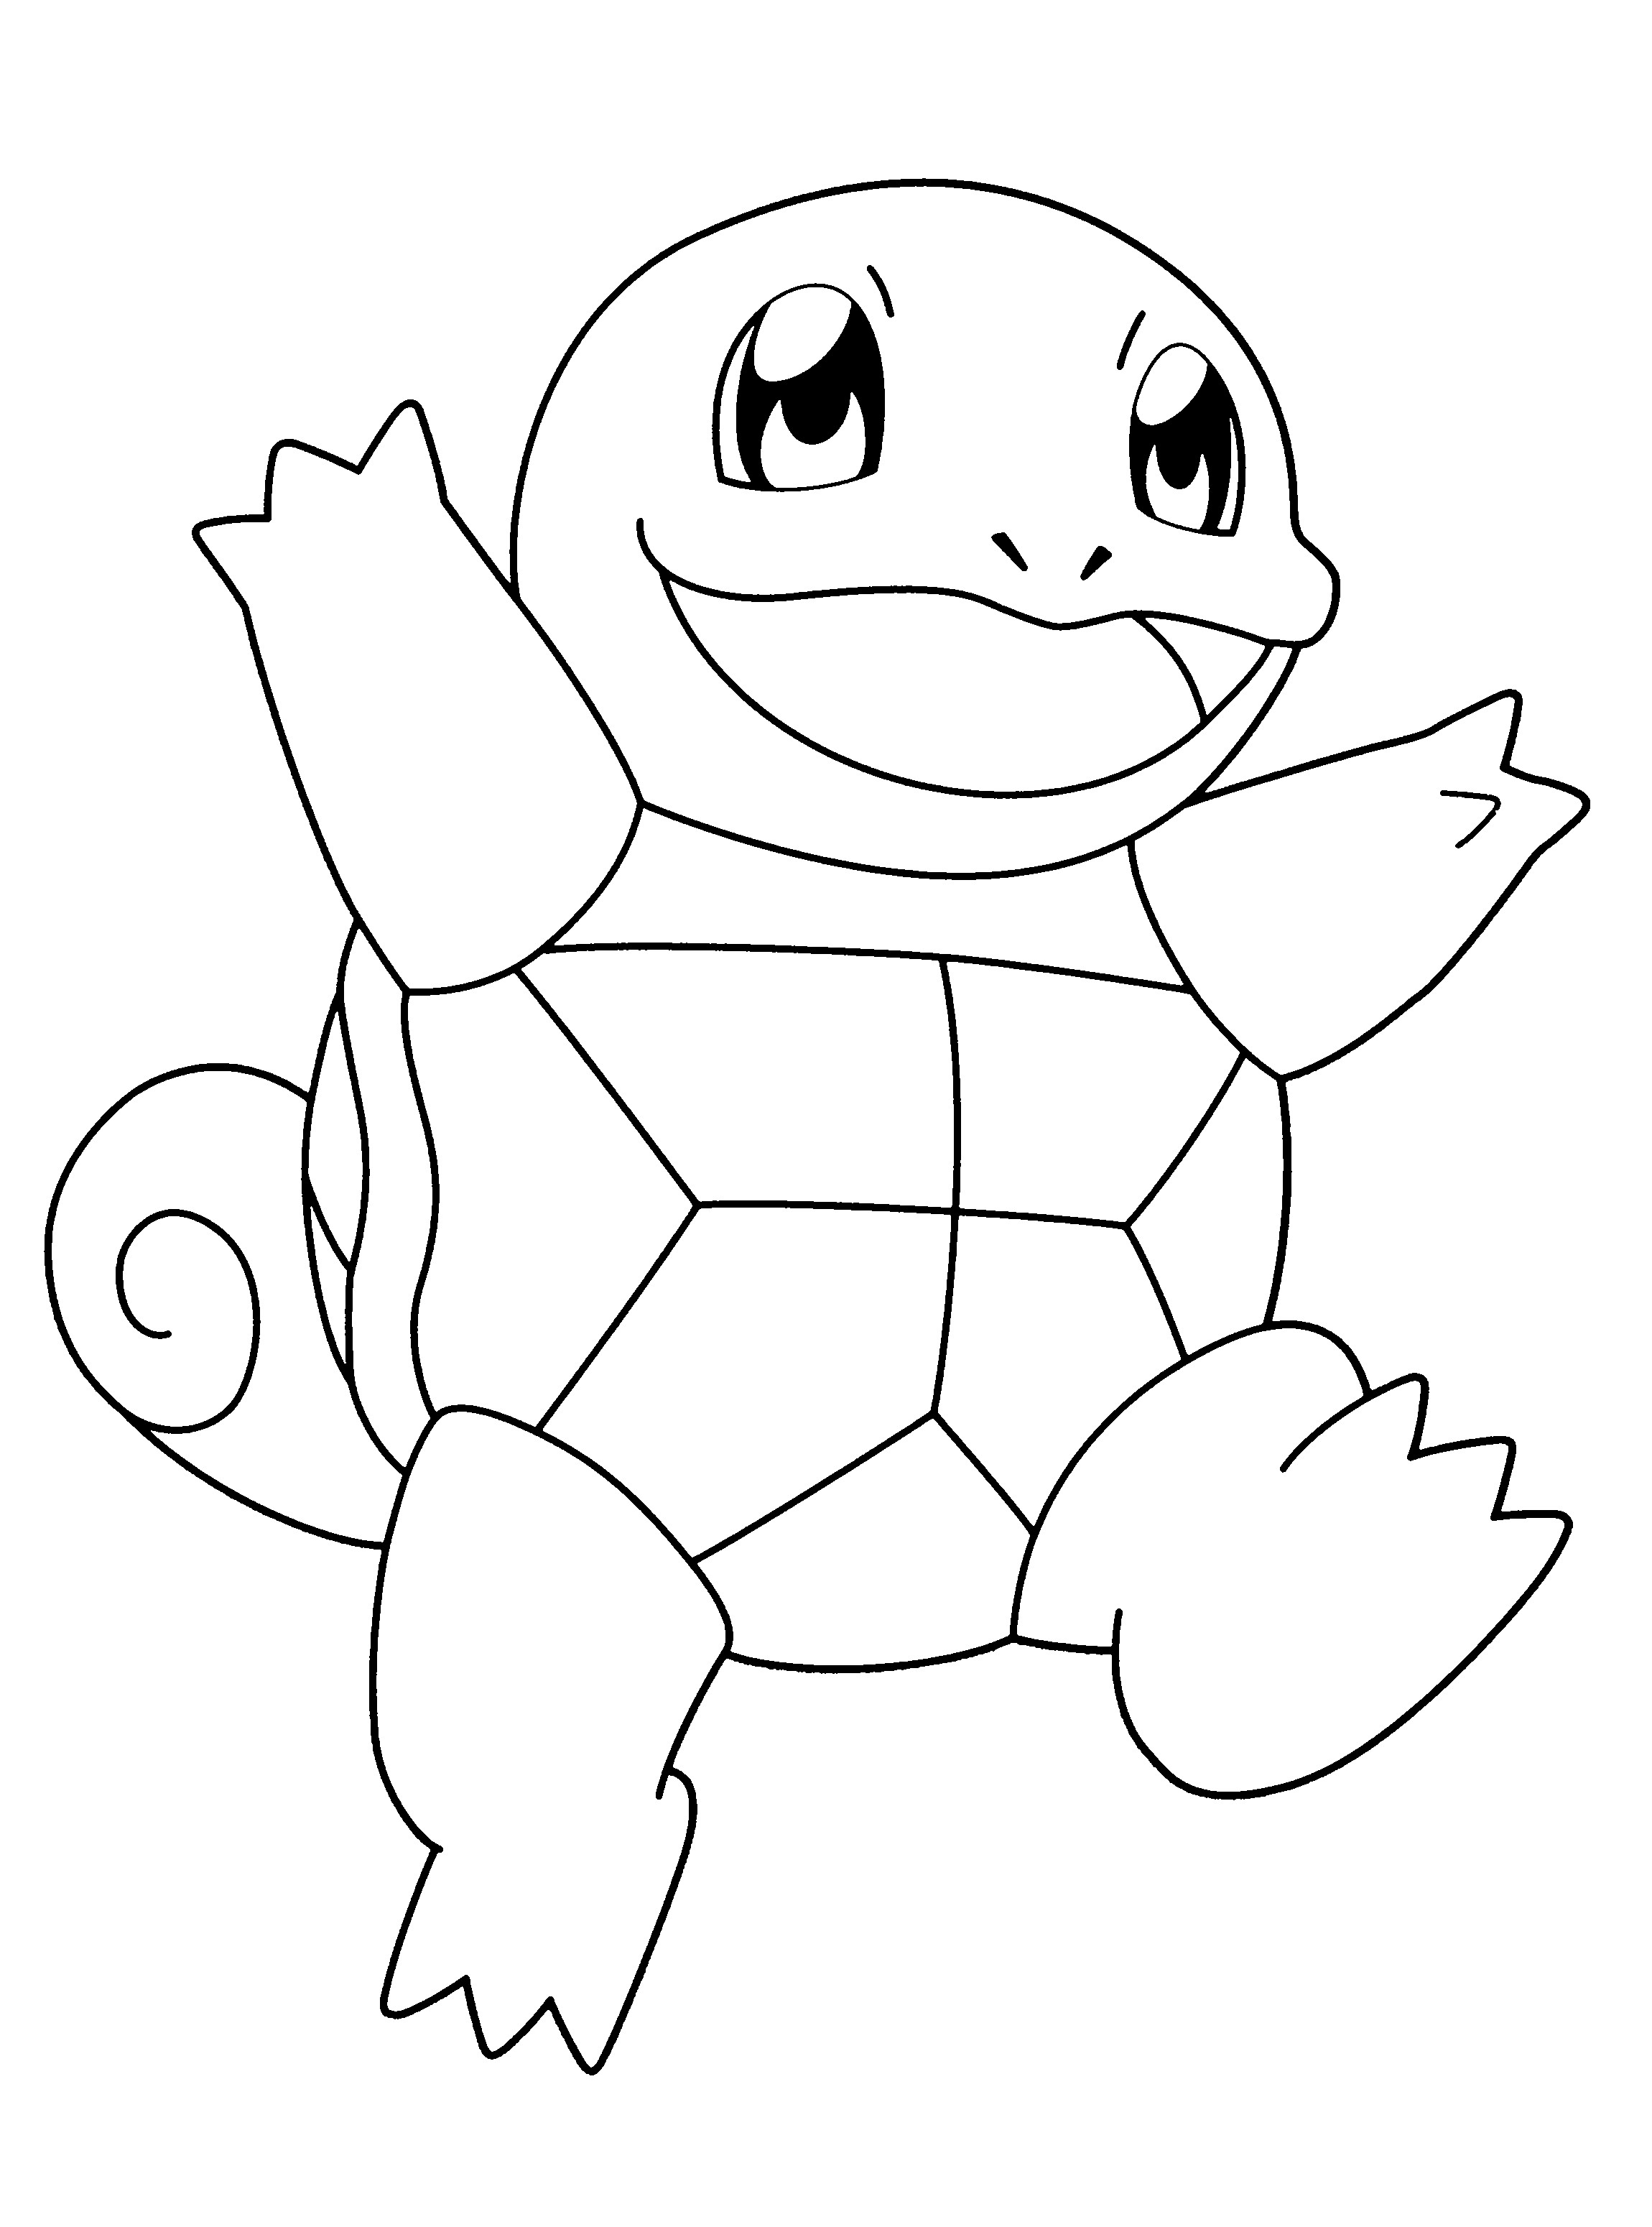 Coloring Pages For Boys Pikachu
 Pikachu and Pokemon coloring pages Coloring Pages BIG BANG